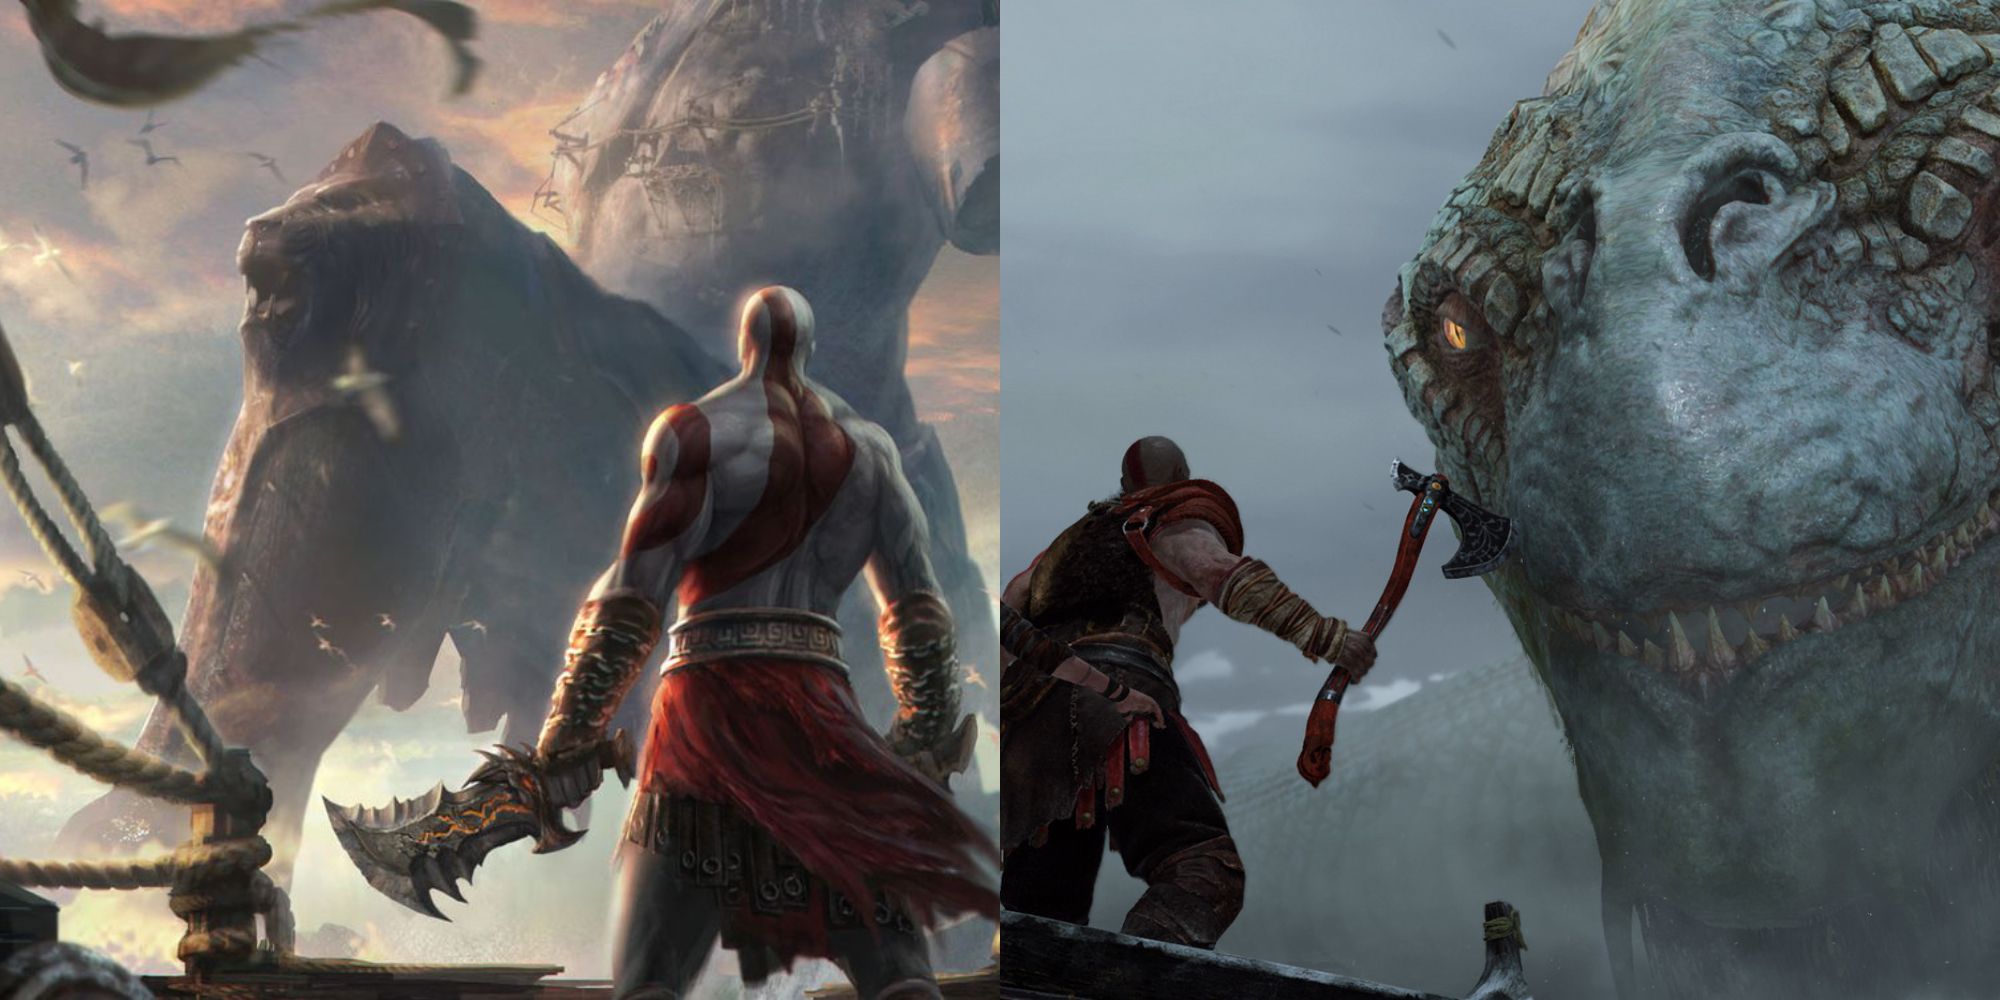 God of War III's graphics engine and various implementation